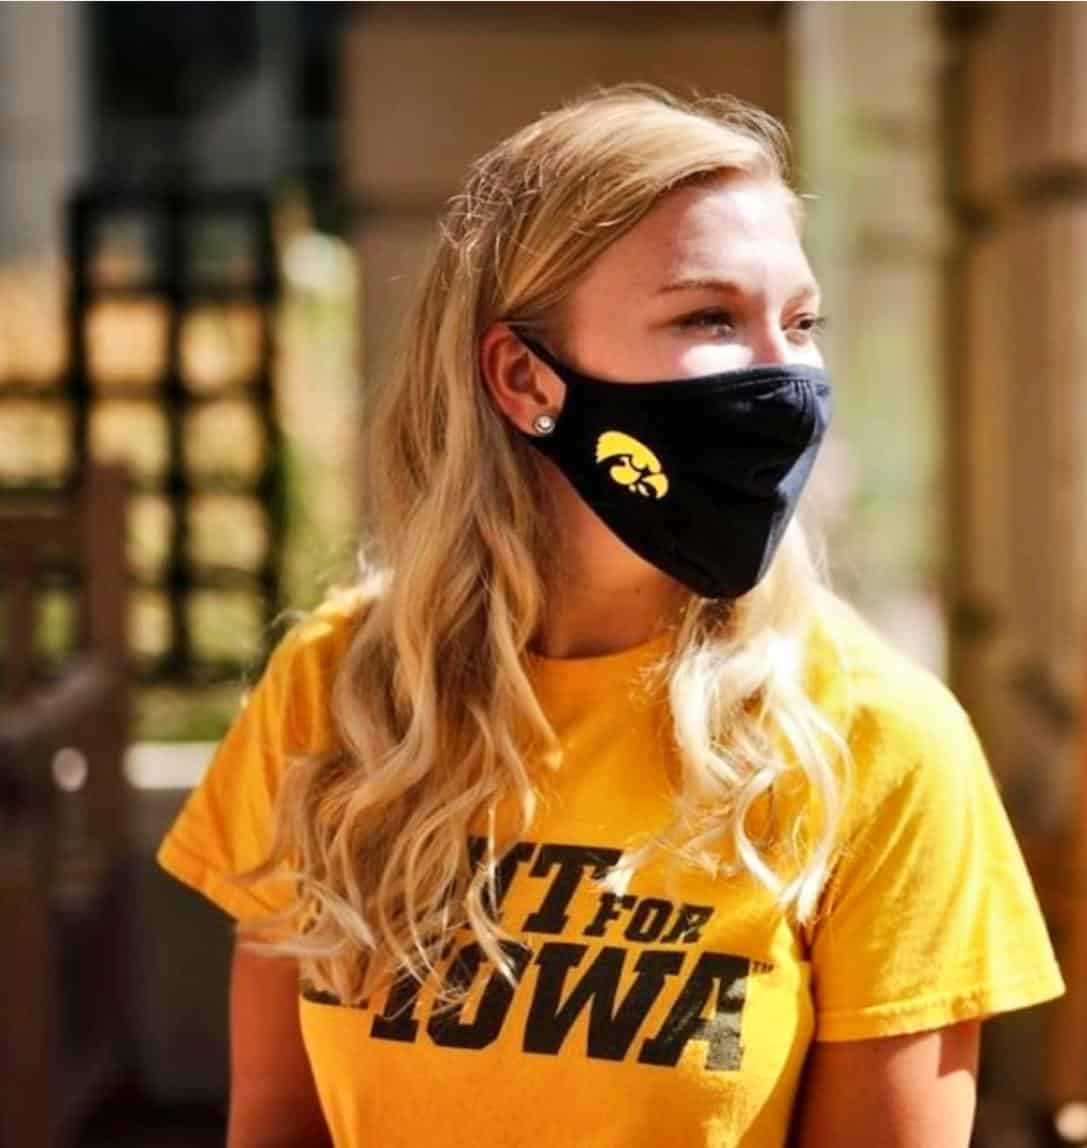 young woman, blonde hair, yellow shirt, black face mask with tigerhawk logo